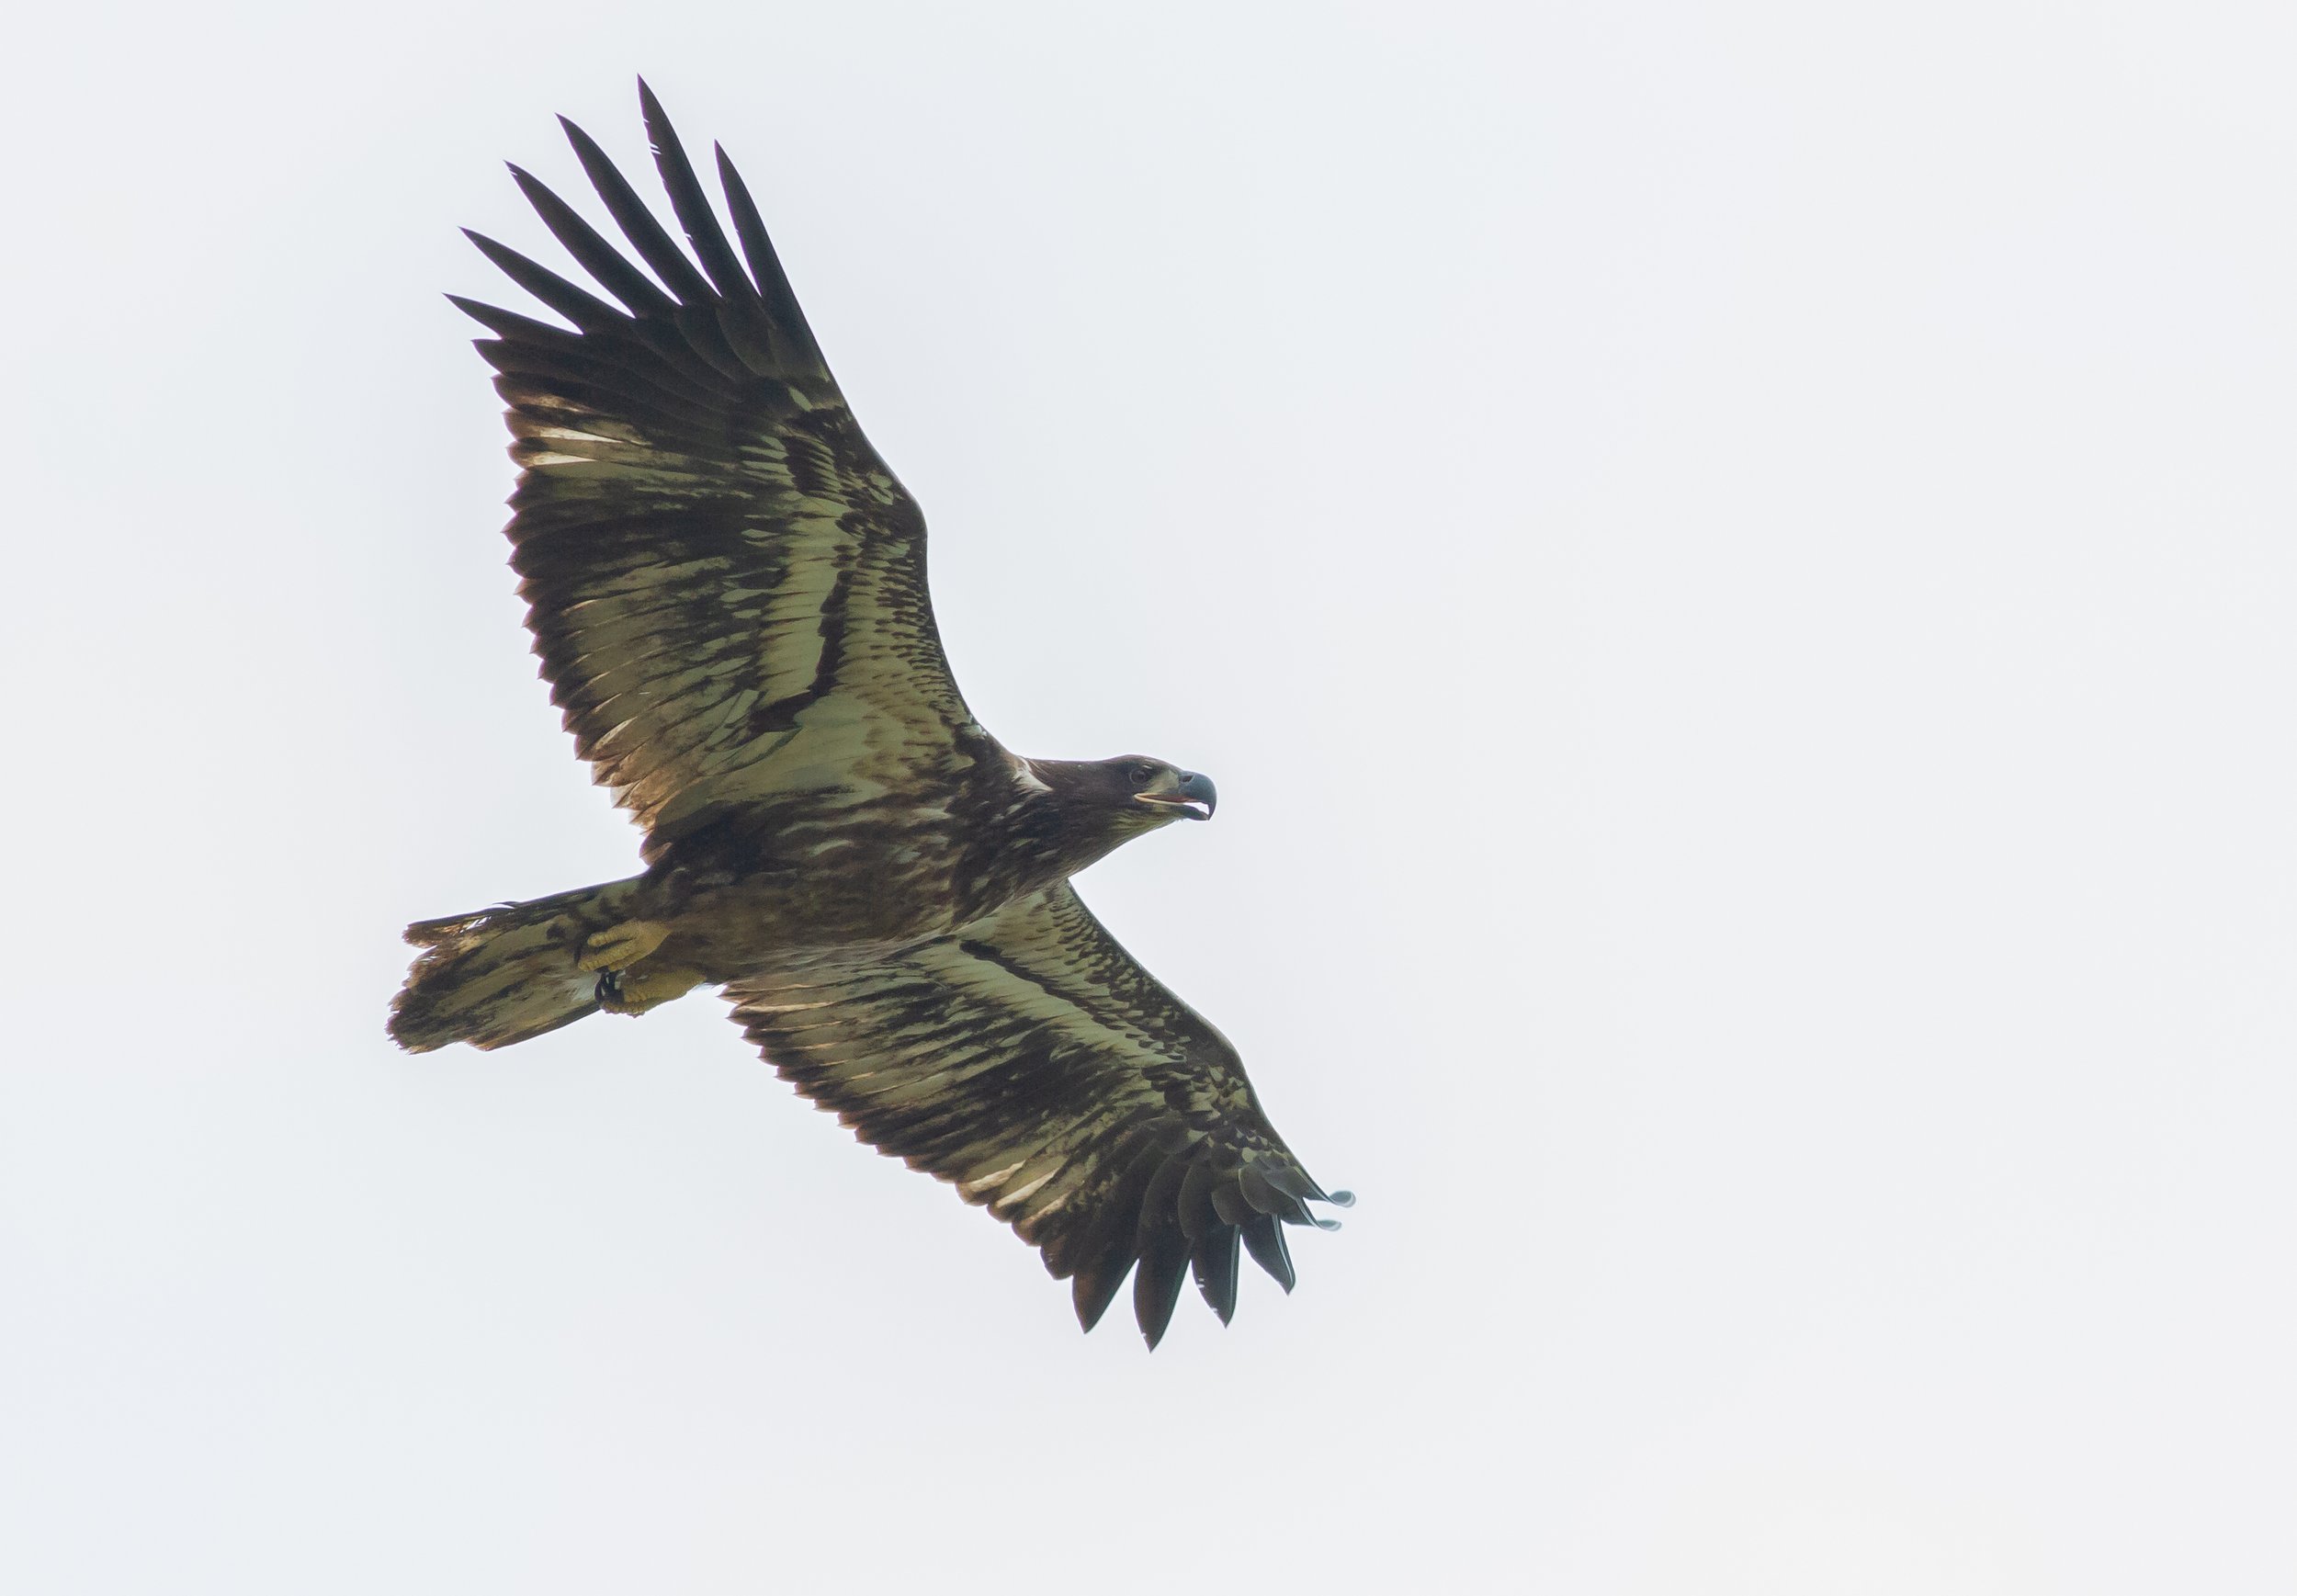 Bald Eagles are a common sight in the area